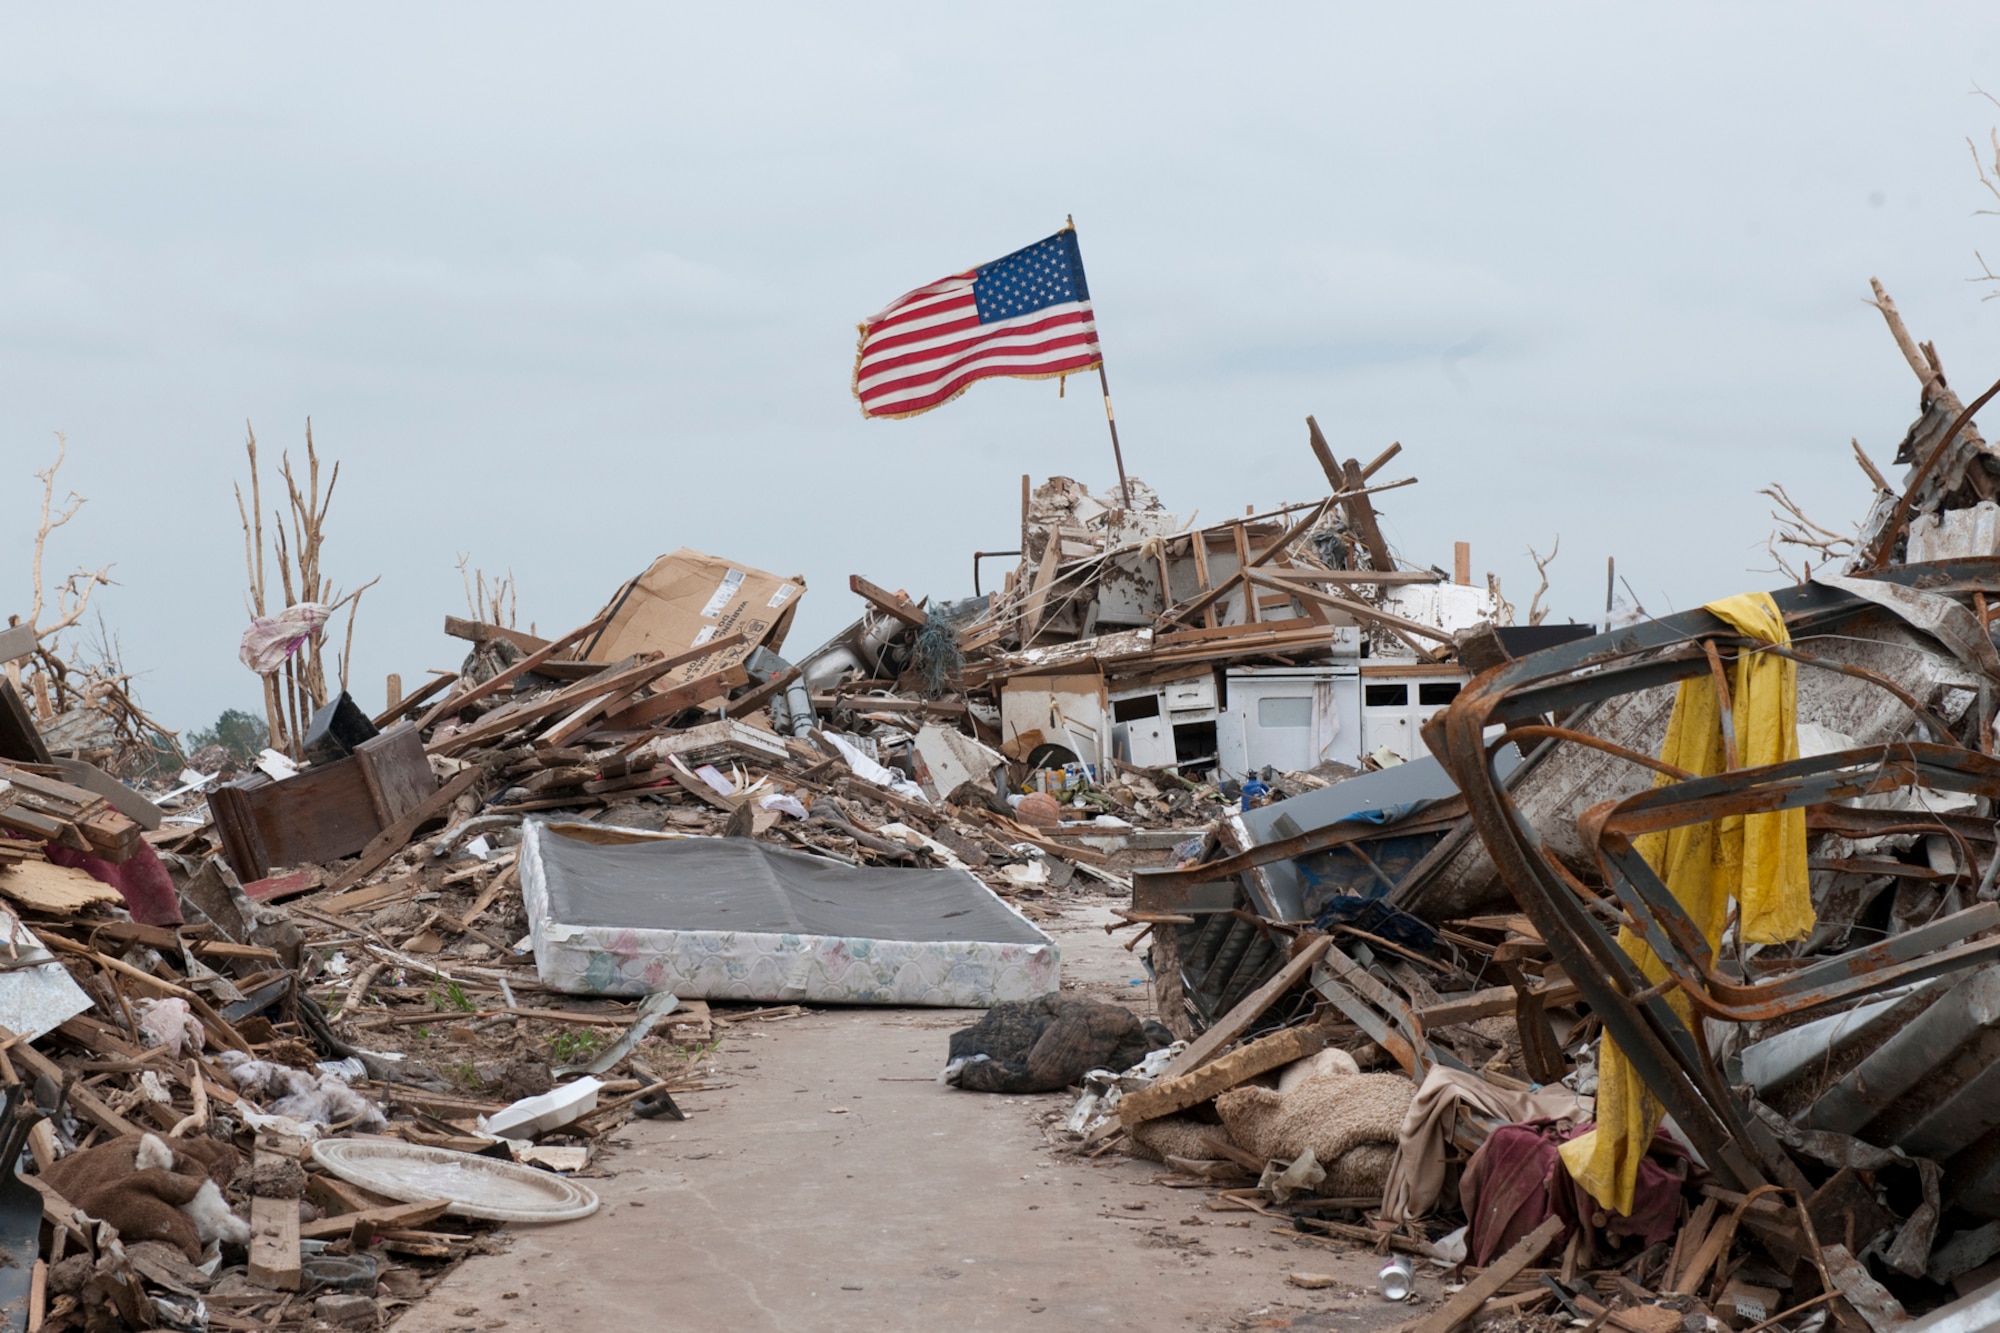 The U.S. flag standing atop mounds of debris where homes were destroyed by a tornado.